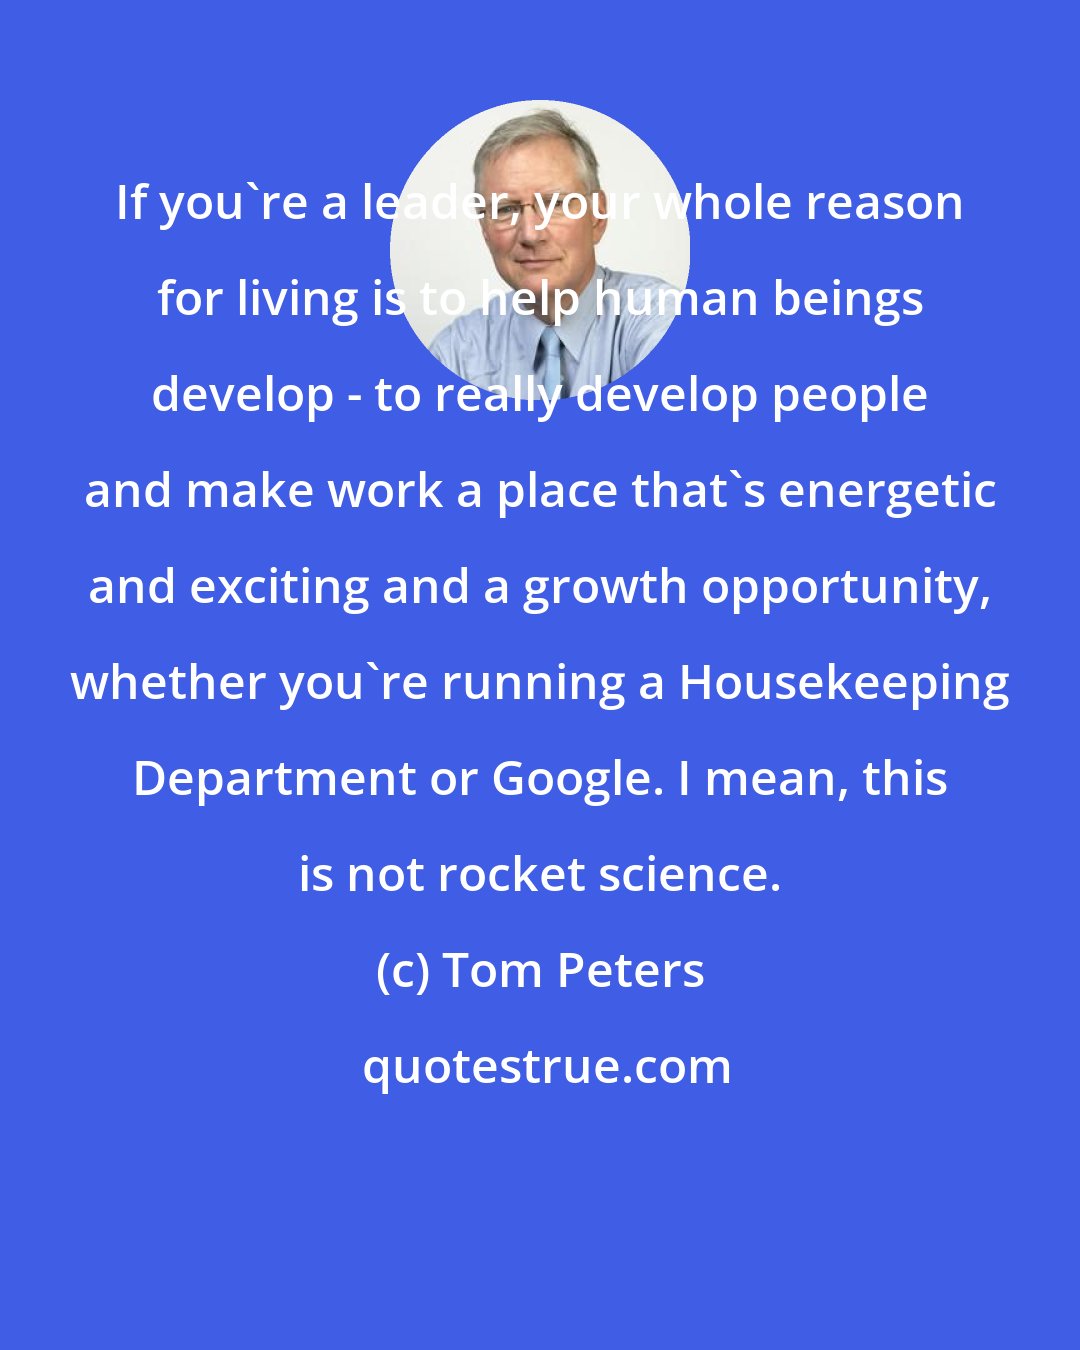 Tom Peters: If you're a leader, your whole reason for living is to help human beings develop - to really develop people and make work a place that's energetic and exciting and a growth opportunity, whether you're running a Housekeeping Department or Google. I mean, this is not rocket science.